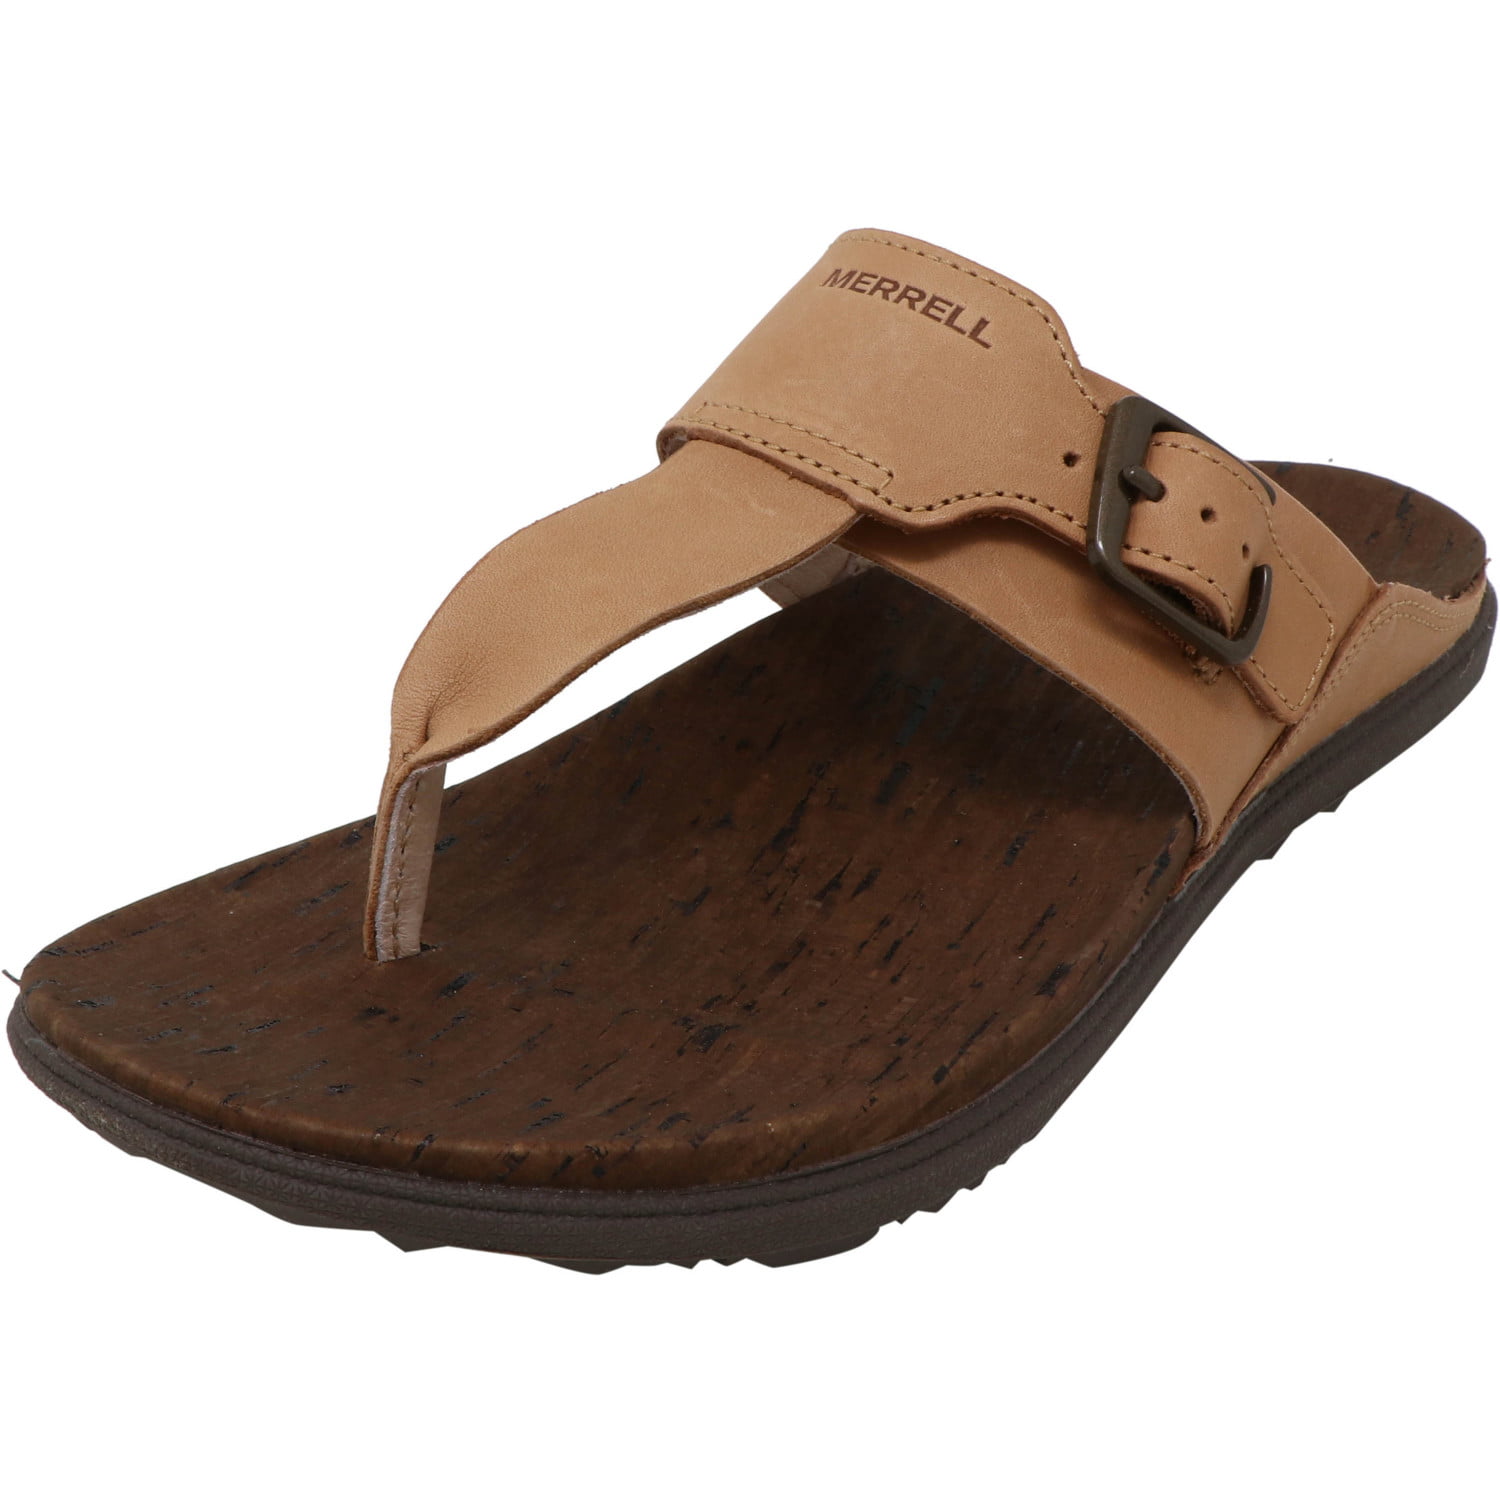 Merrell Women's Around Town Luxe Post Natural Tan Leather Sandal - 10M ...